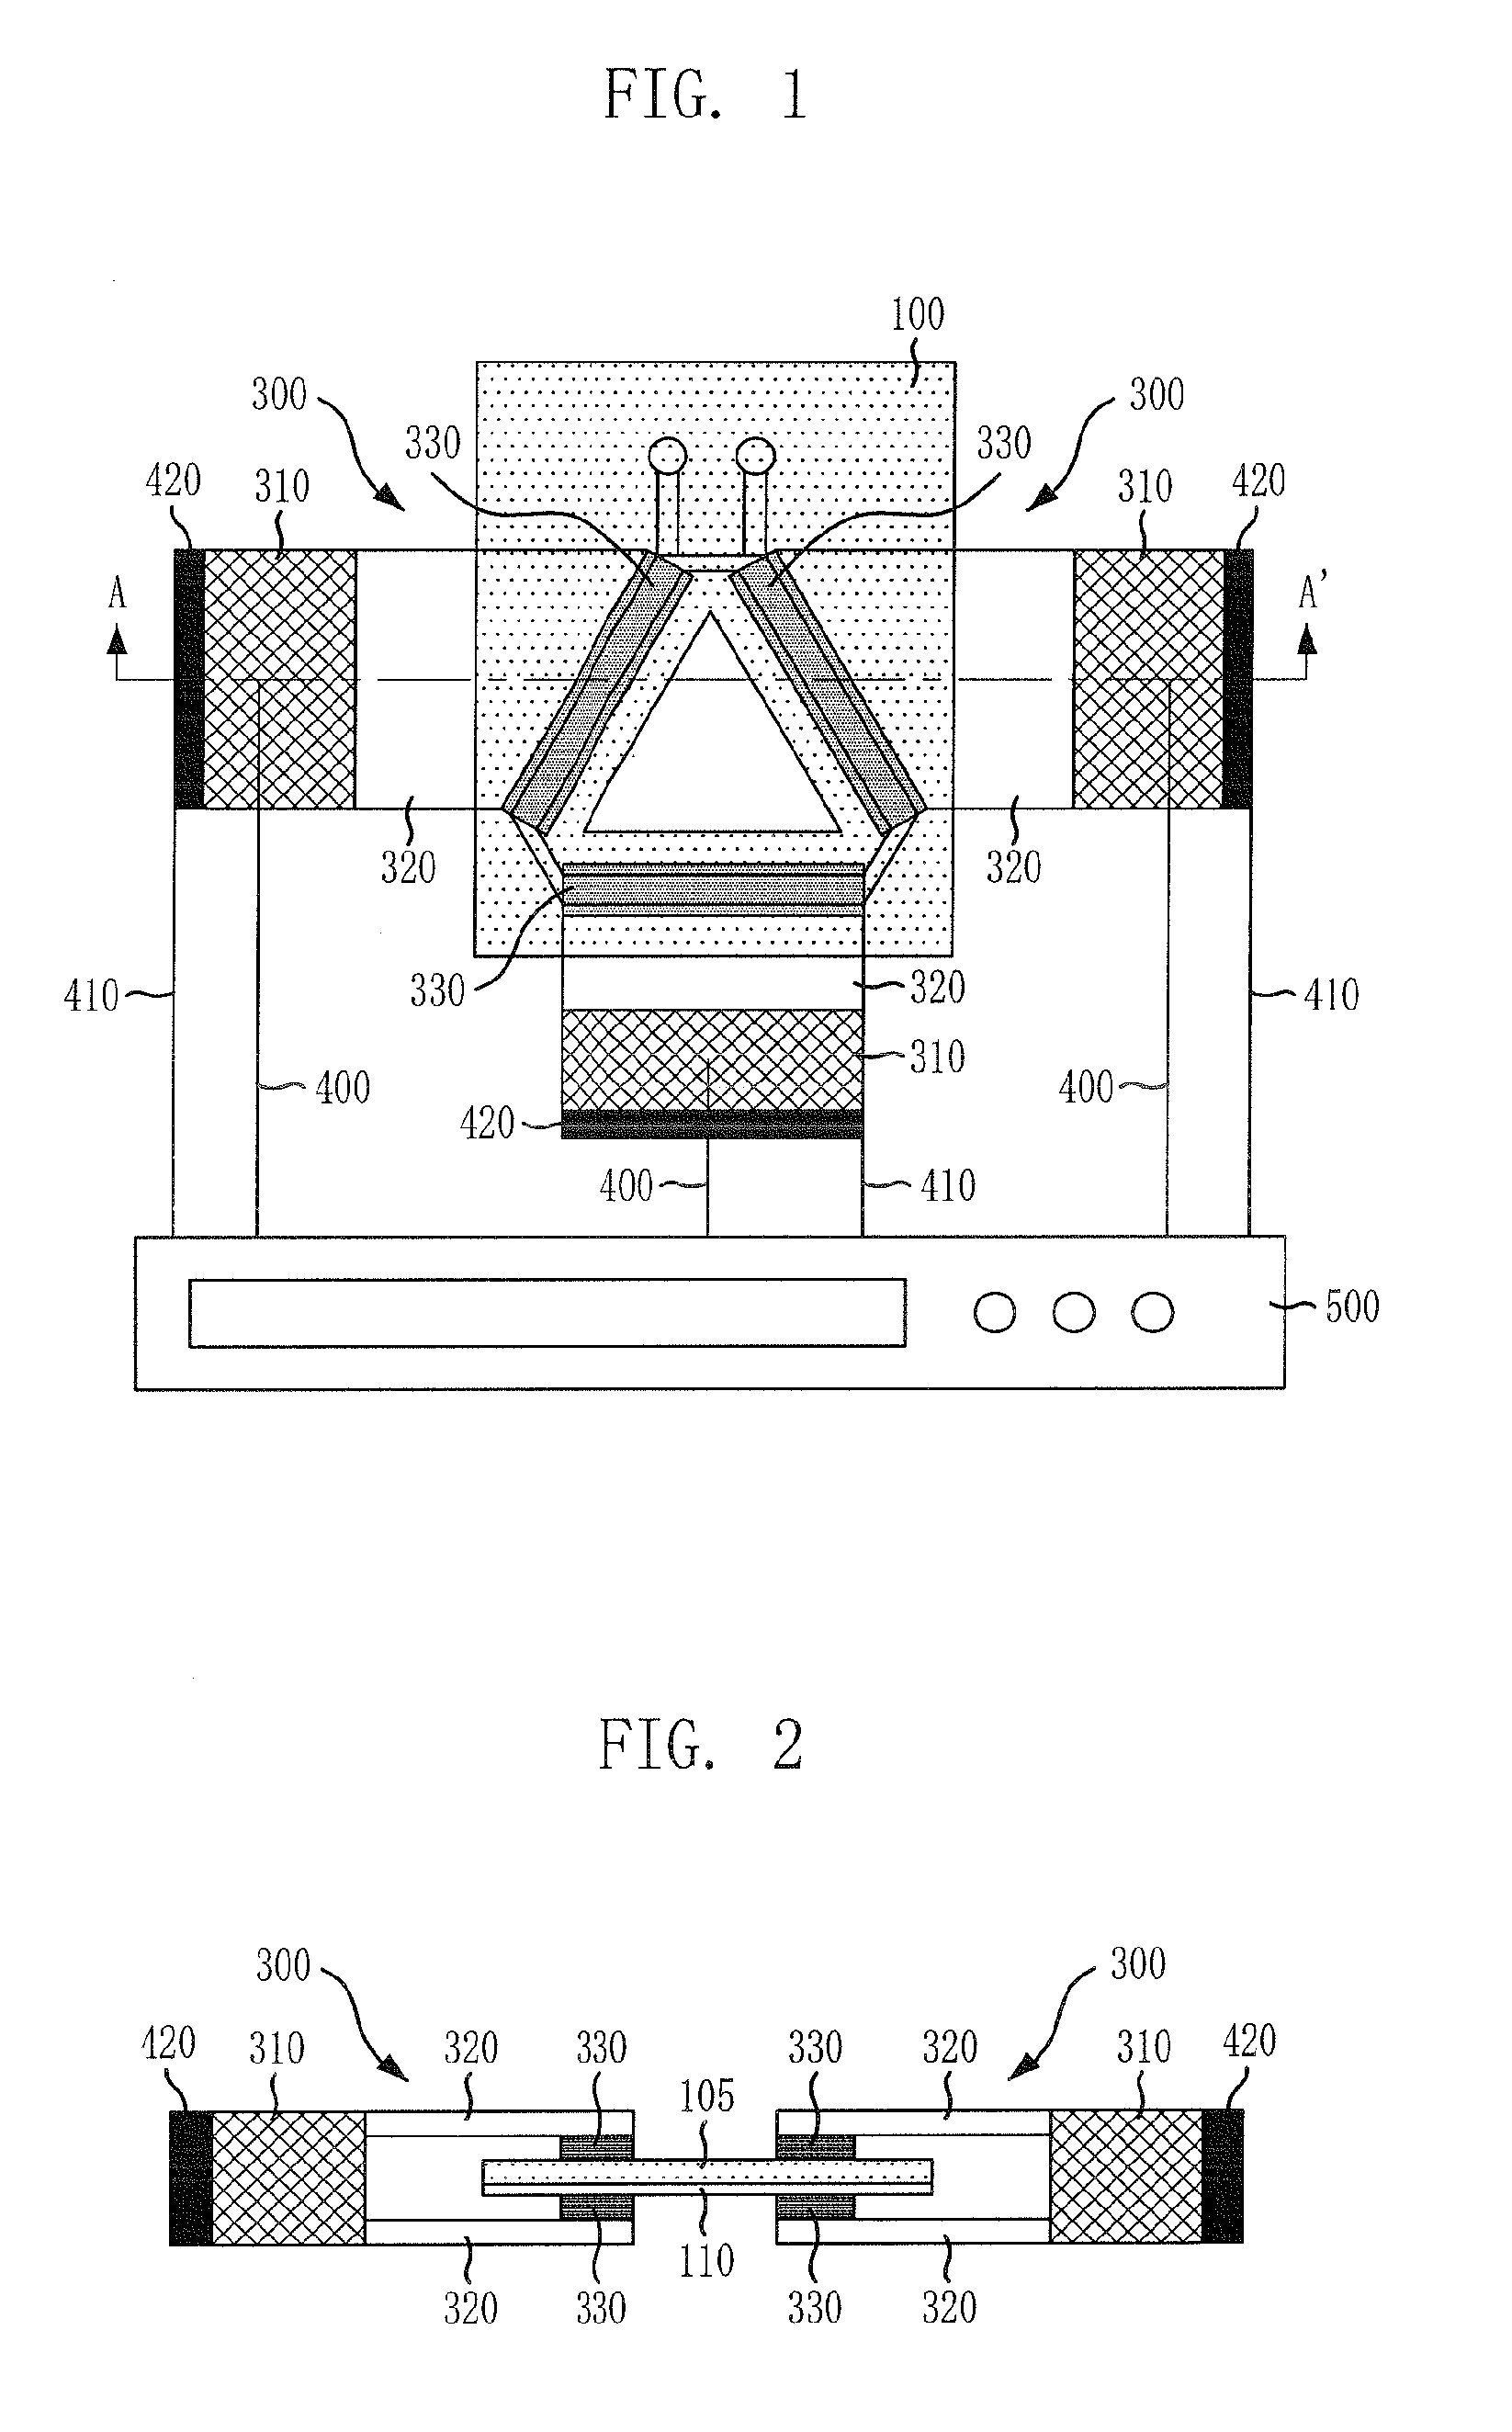 Natural convection-driven PCR apparatus and method using disposable polymer chip